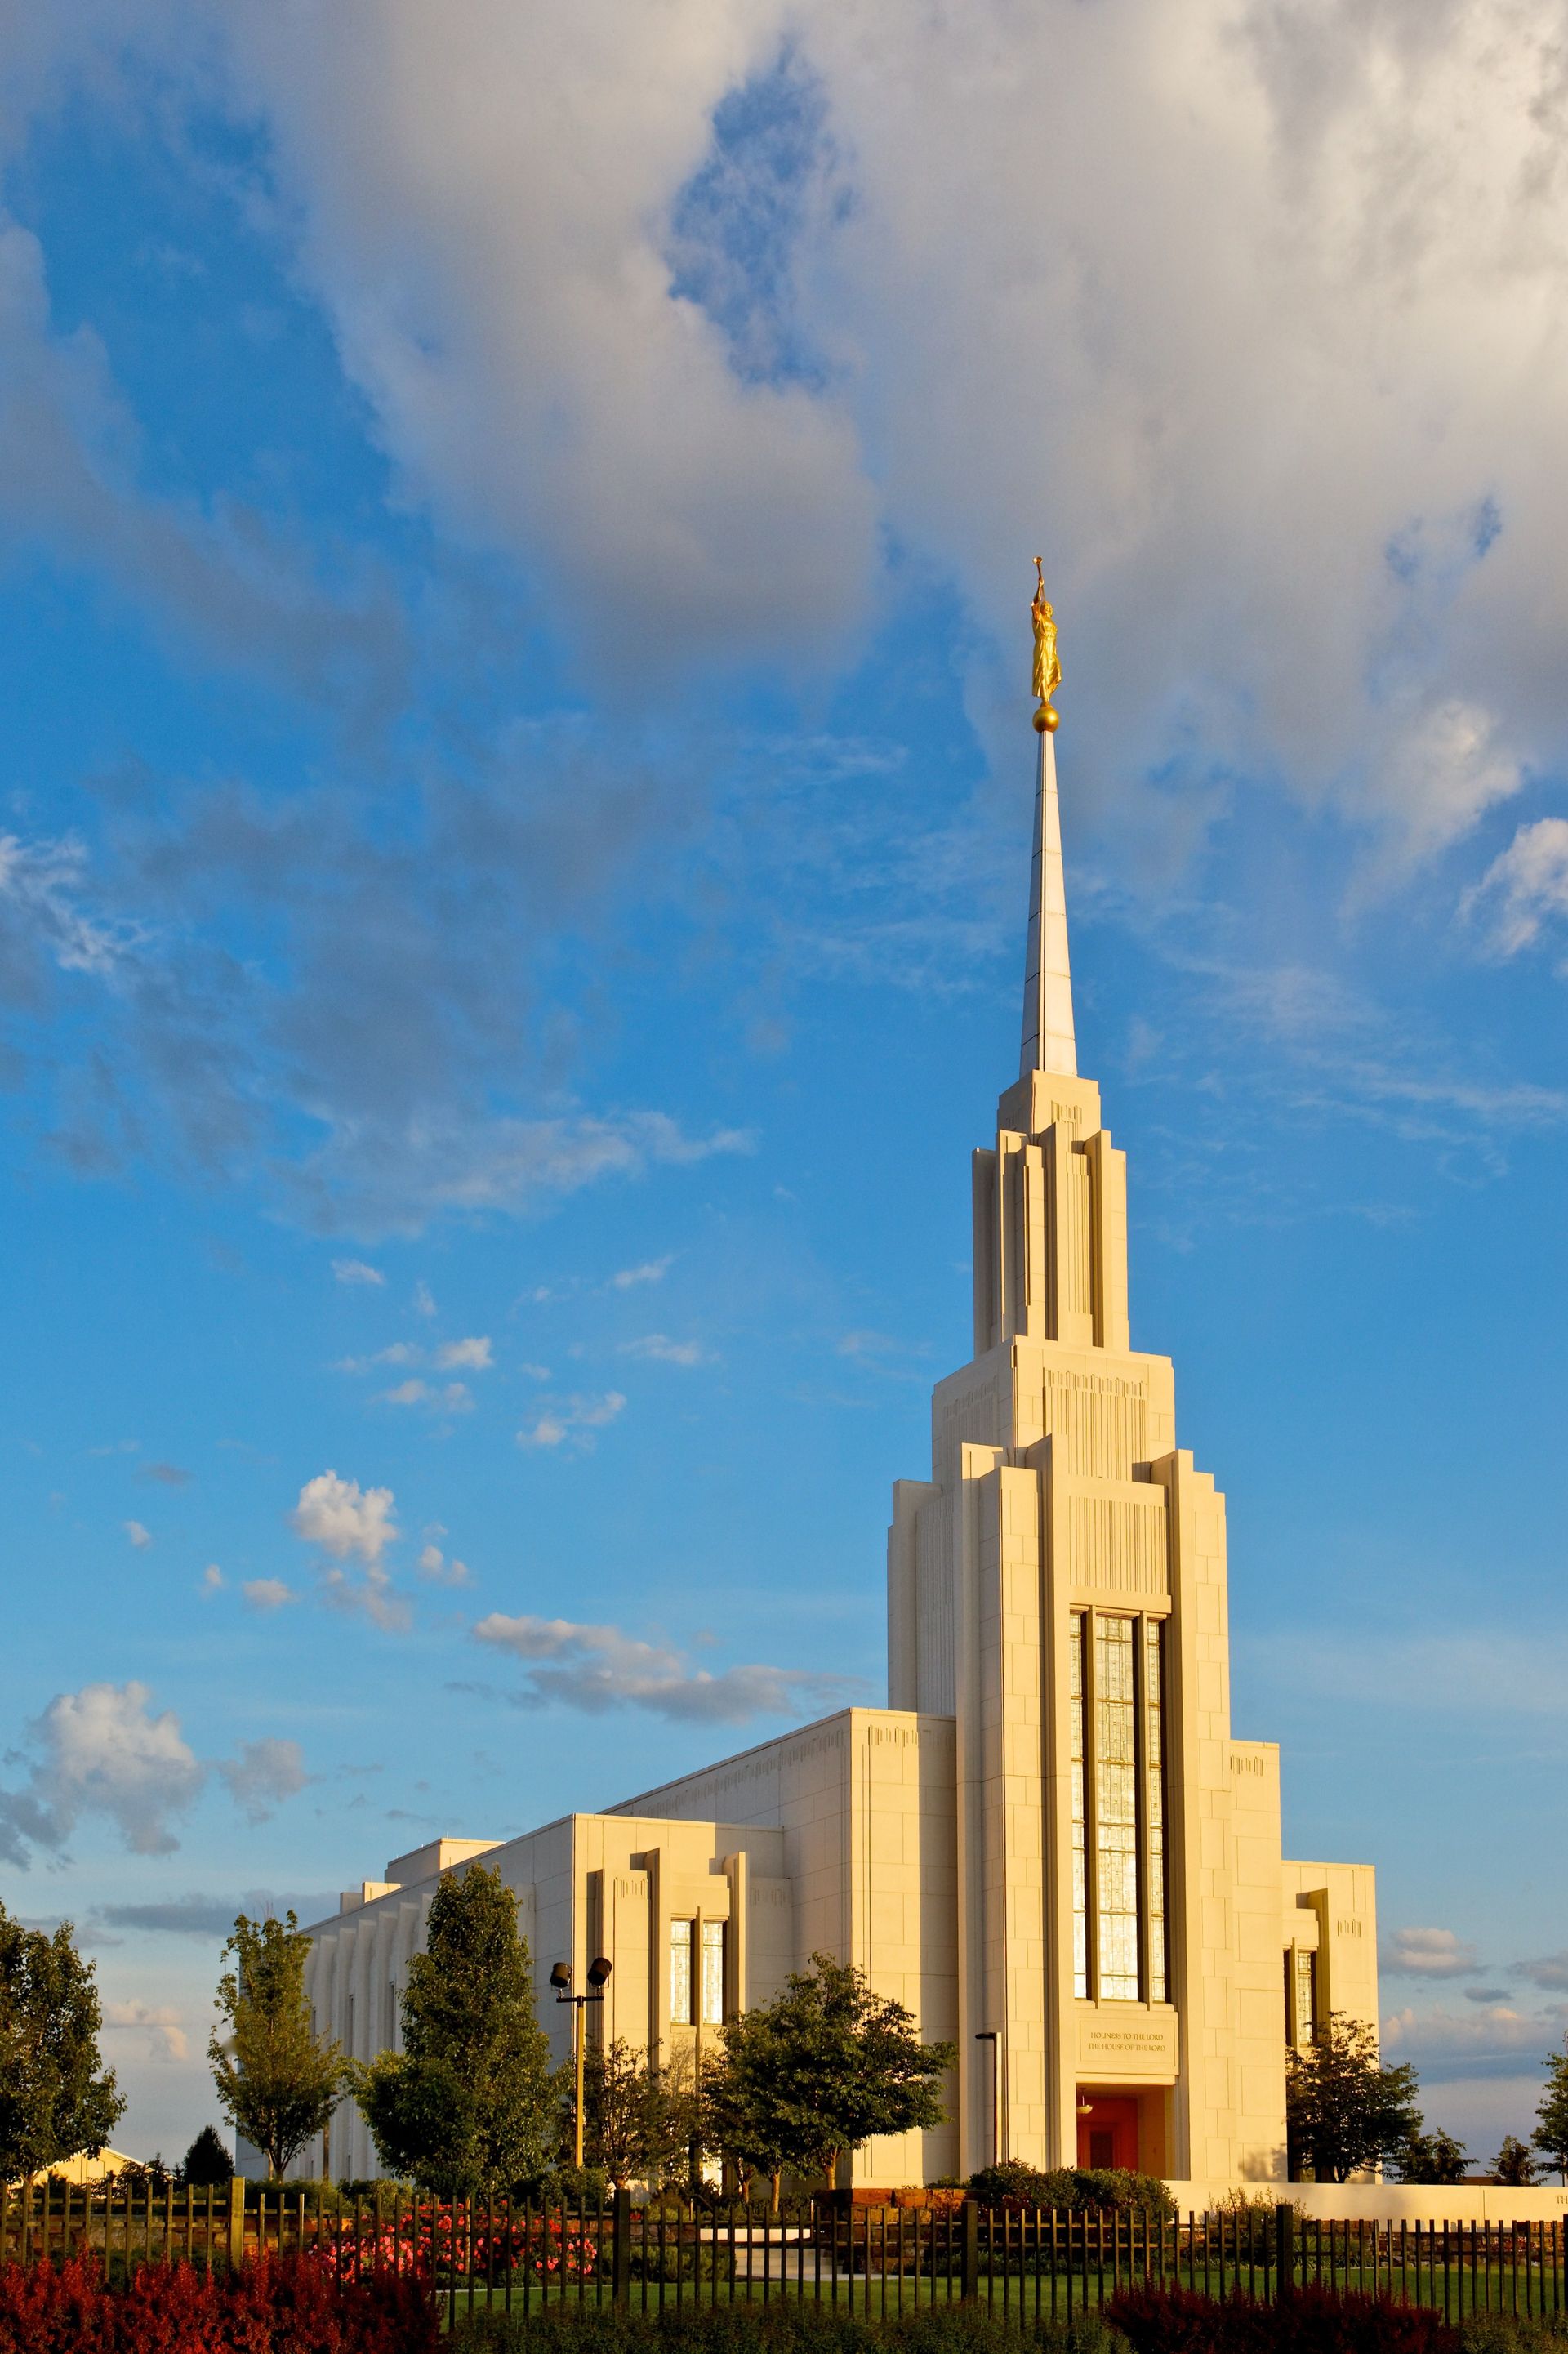 The Twin Falls Idaho Temple during daylight, including the entrance and scenery.